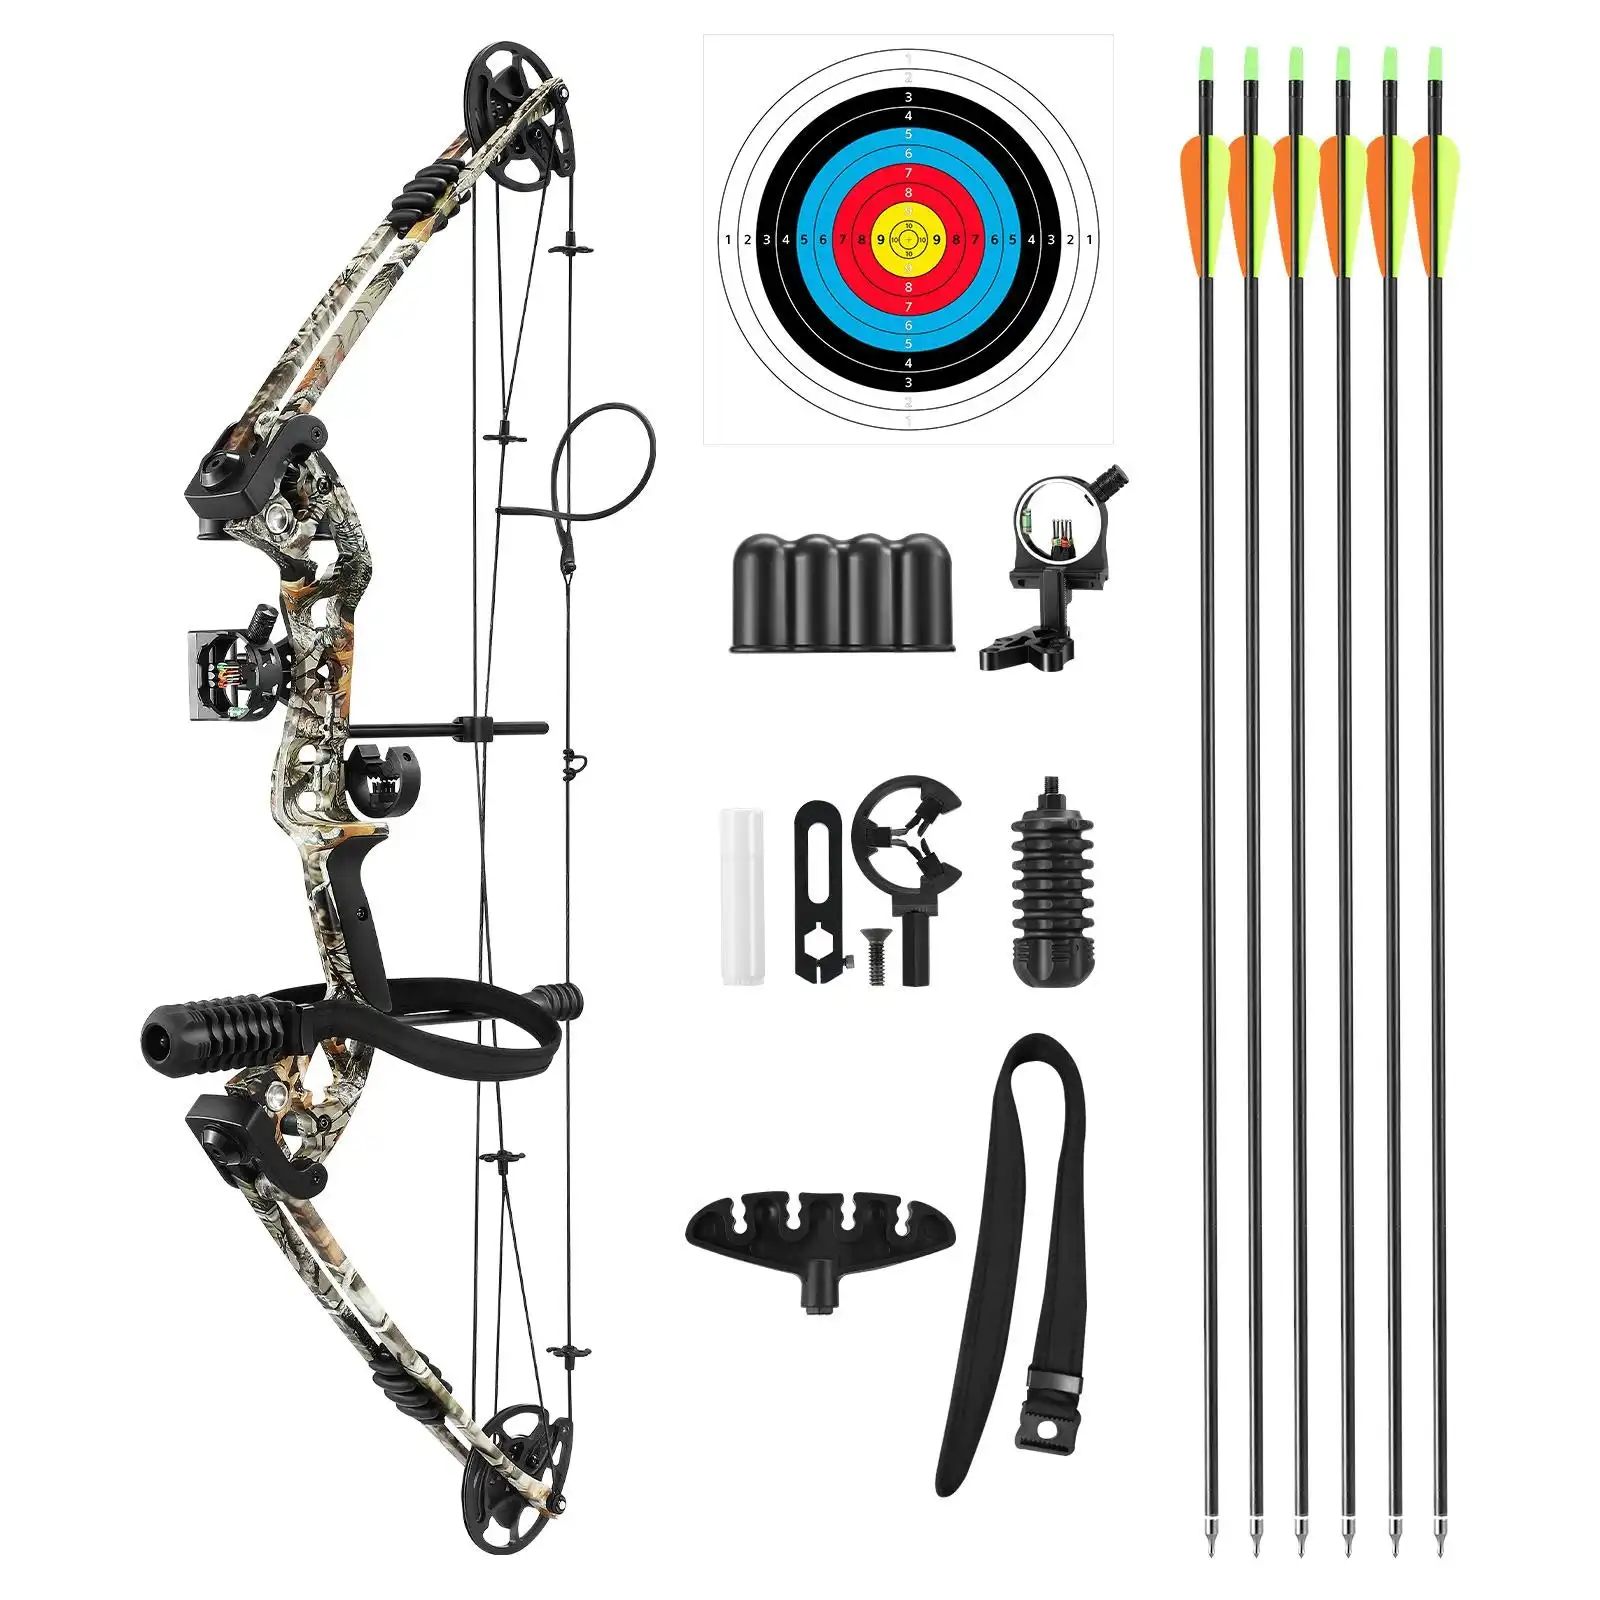 Ausway Compound Bow Arrow Archery Equipment Set Sports Hunting Target Shooting 20-55lbs Right Handed for Beginner Master Camo